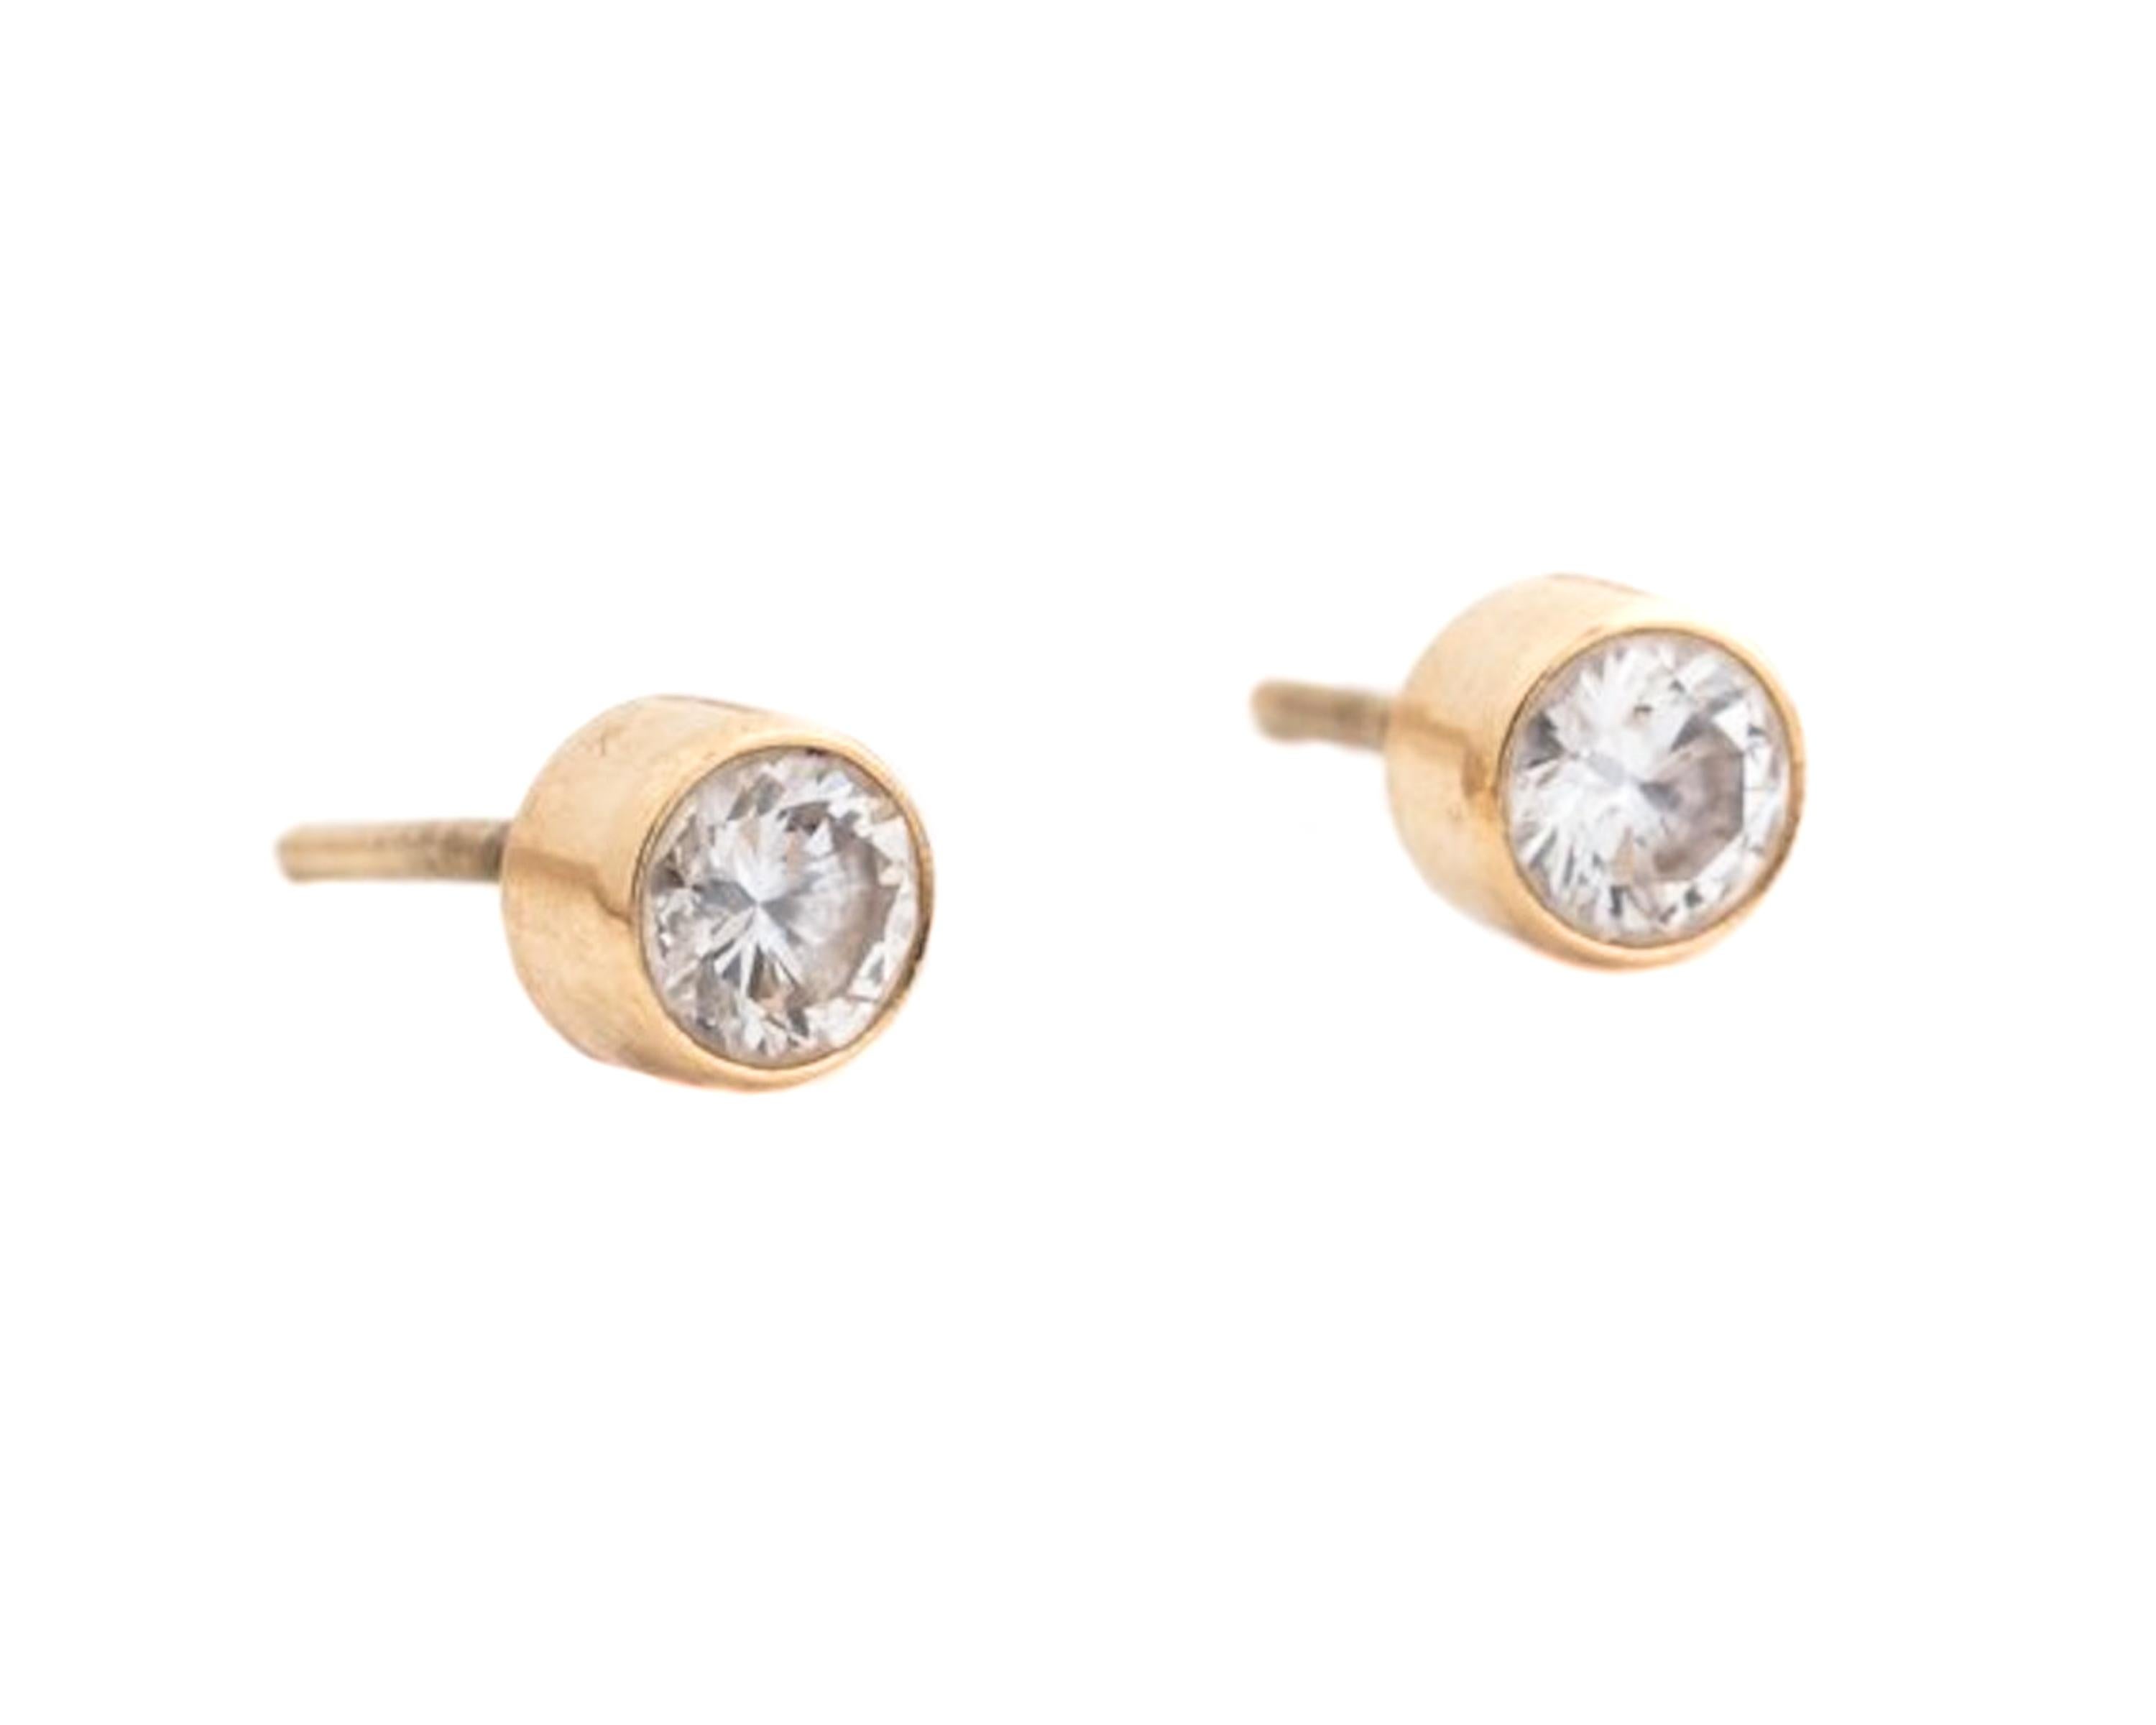 1980s Diamond Earrings, Screw Back - 14k Yellow Gold, Diamonds

The Round Brilliant Diamonds are surrounded by a 14k yellow gold bezel frame.
The earrings measure 4.5 millimeters across. 
The backs are not included in the photos, but are included